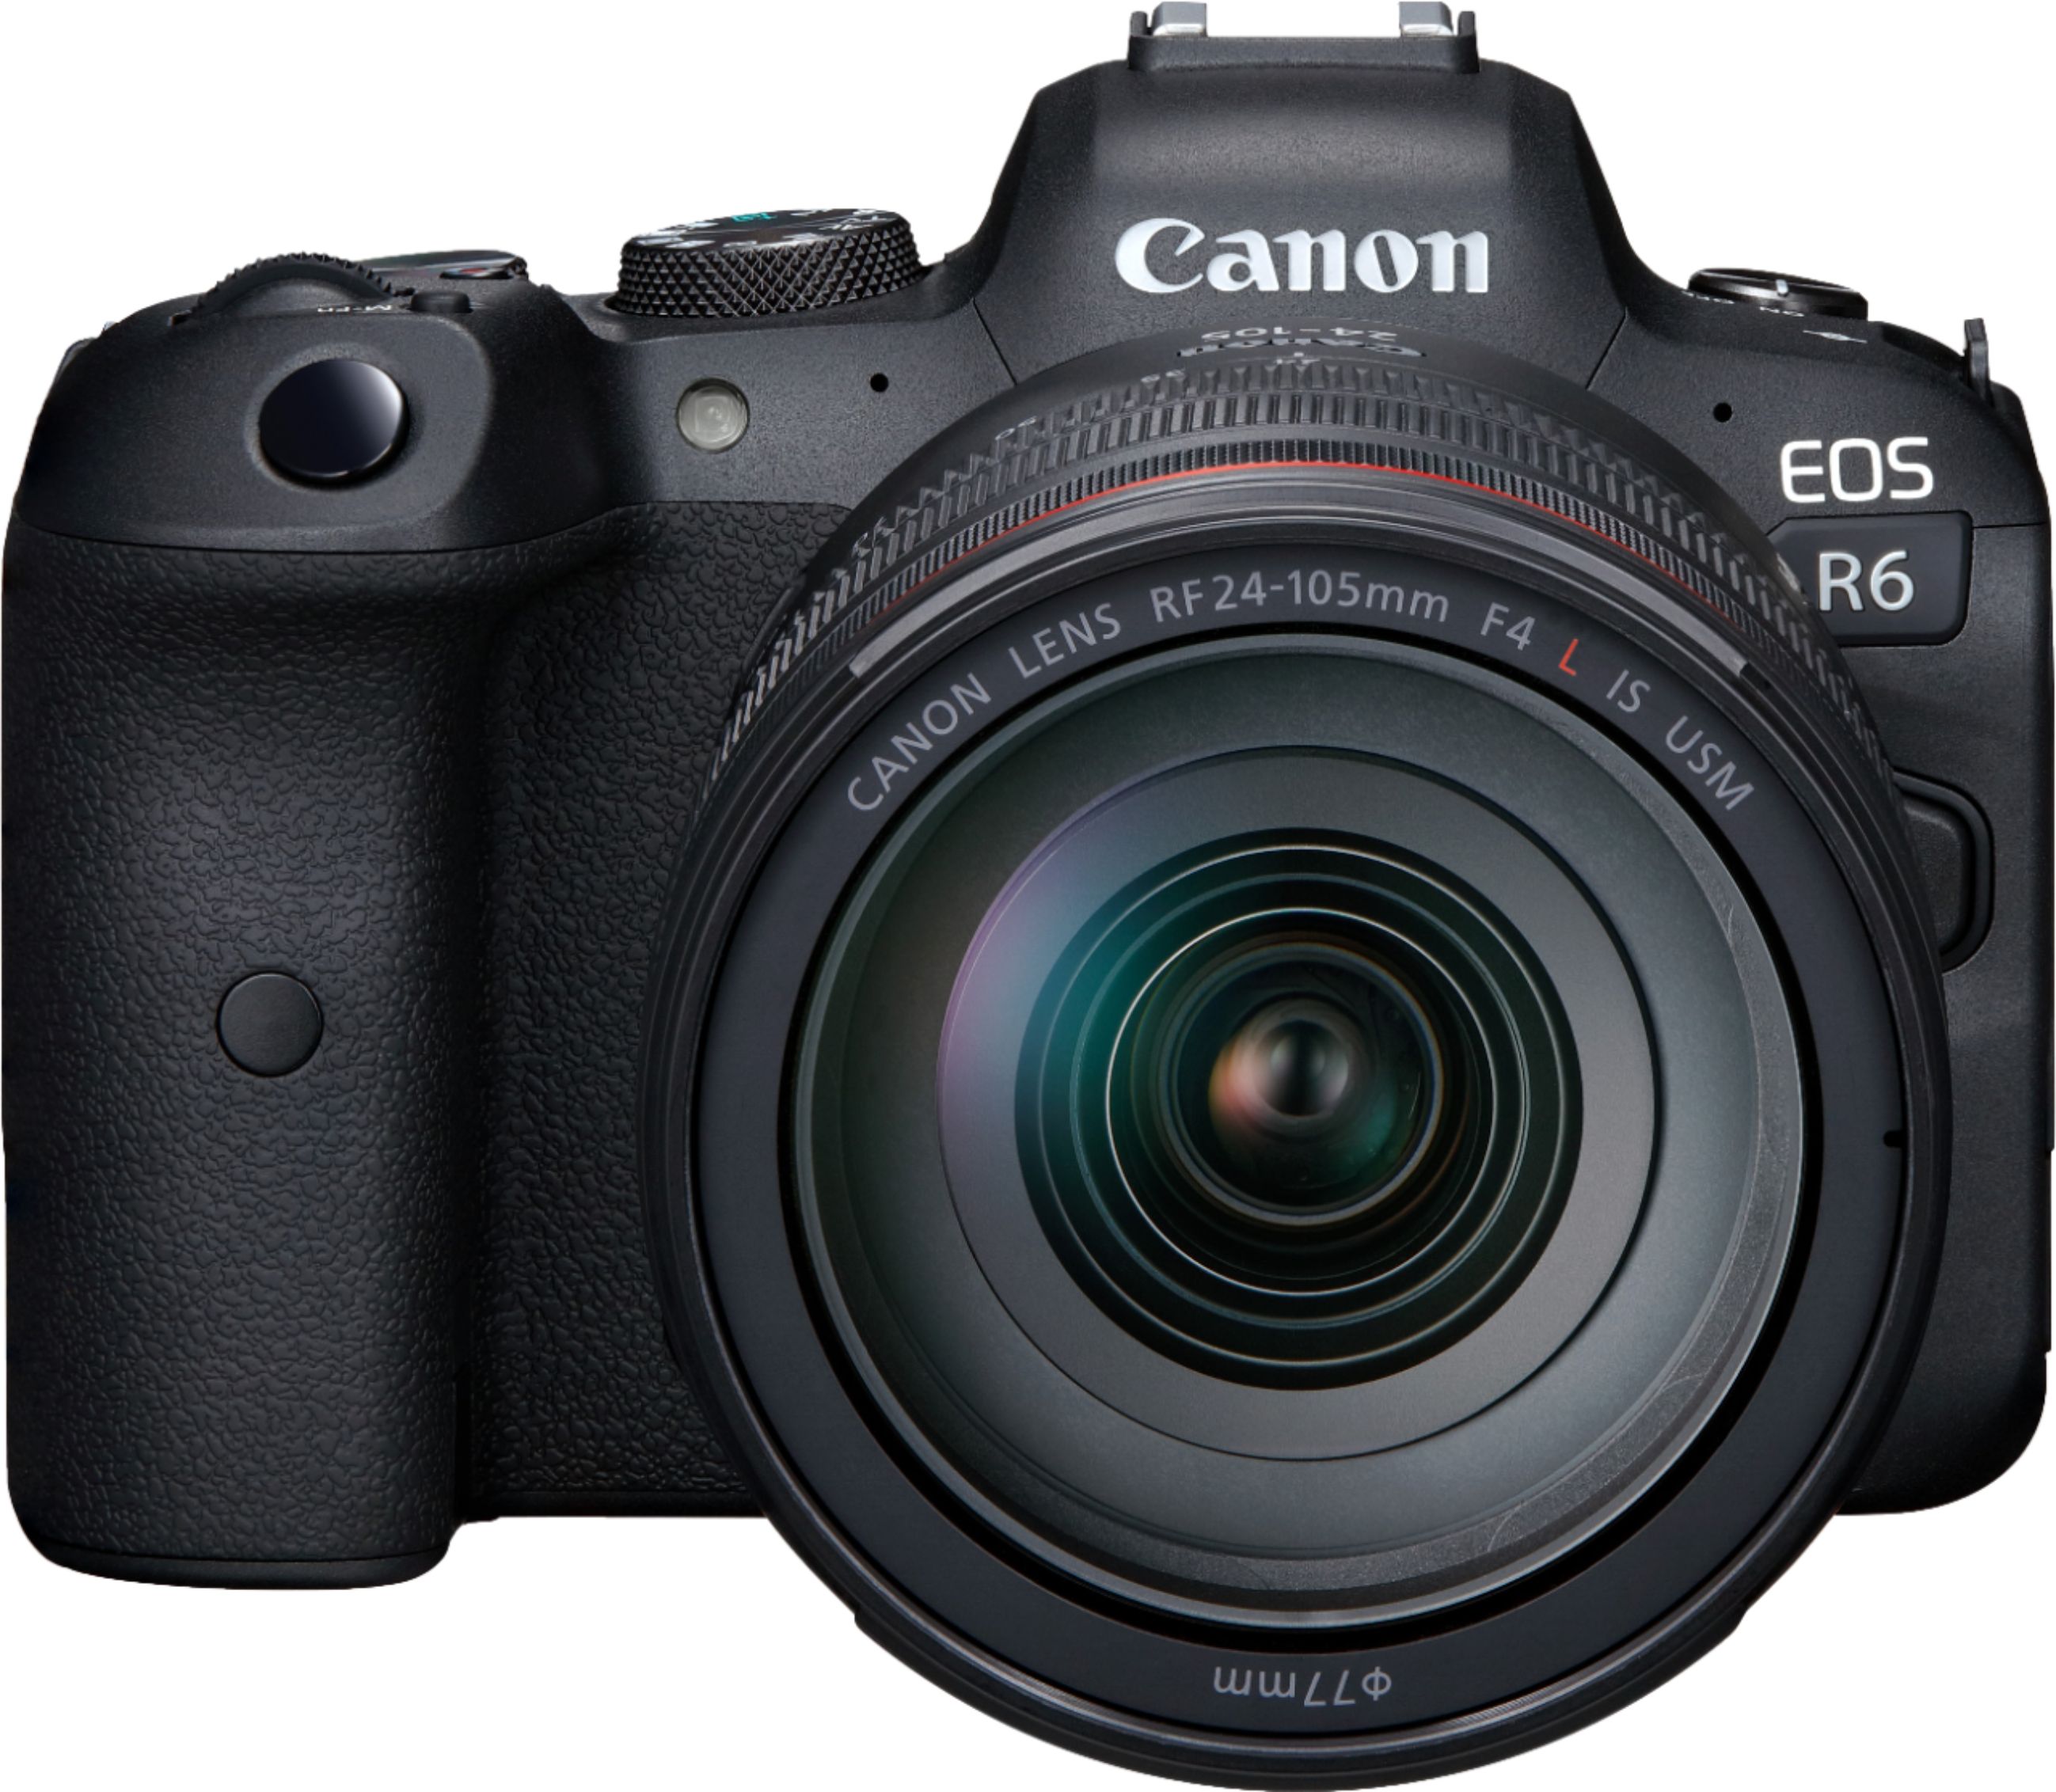 Canon - EOS R6 Mirrorless Camera with RF 24-105mm f/4L IS USM Lens - Black